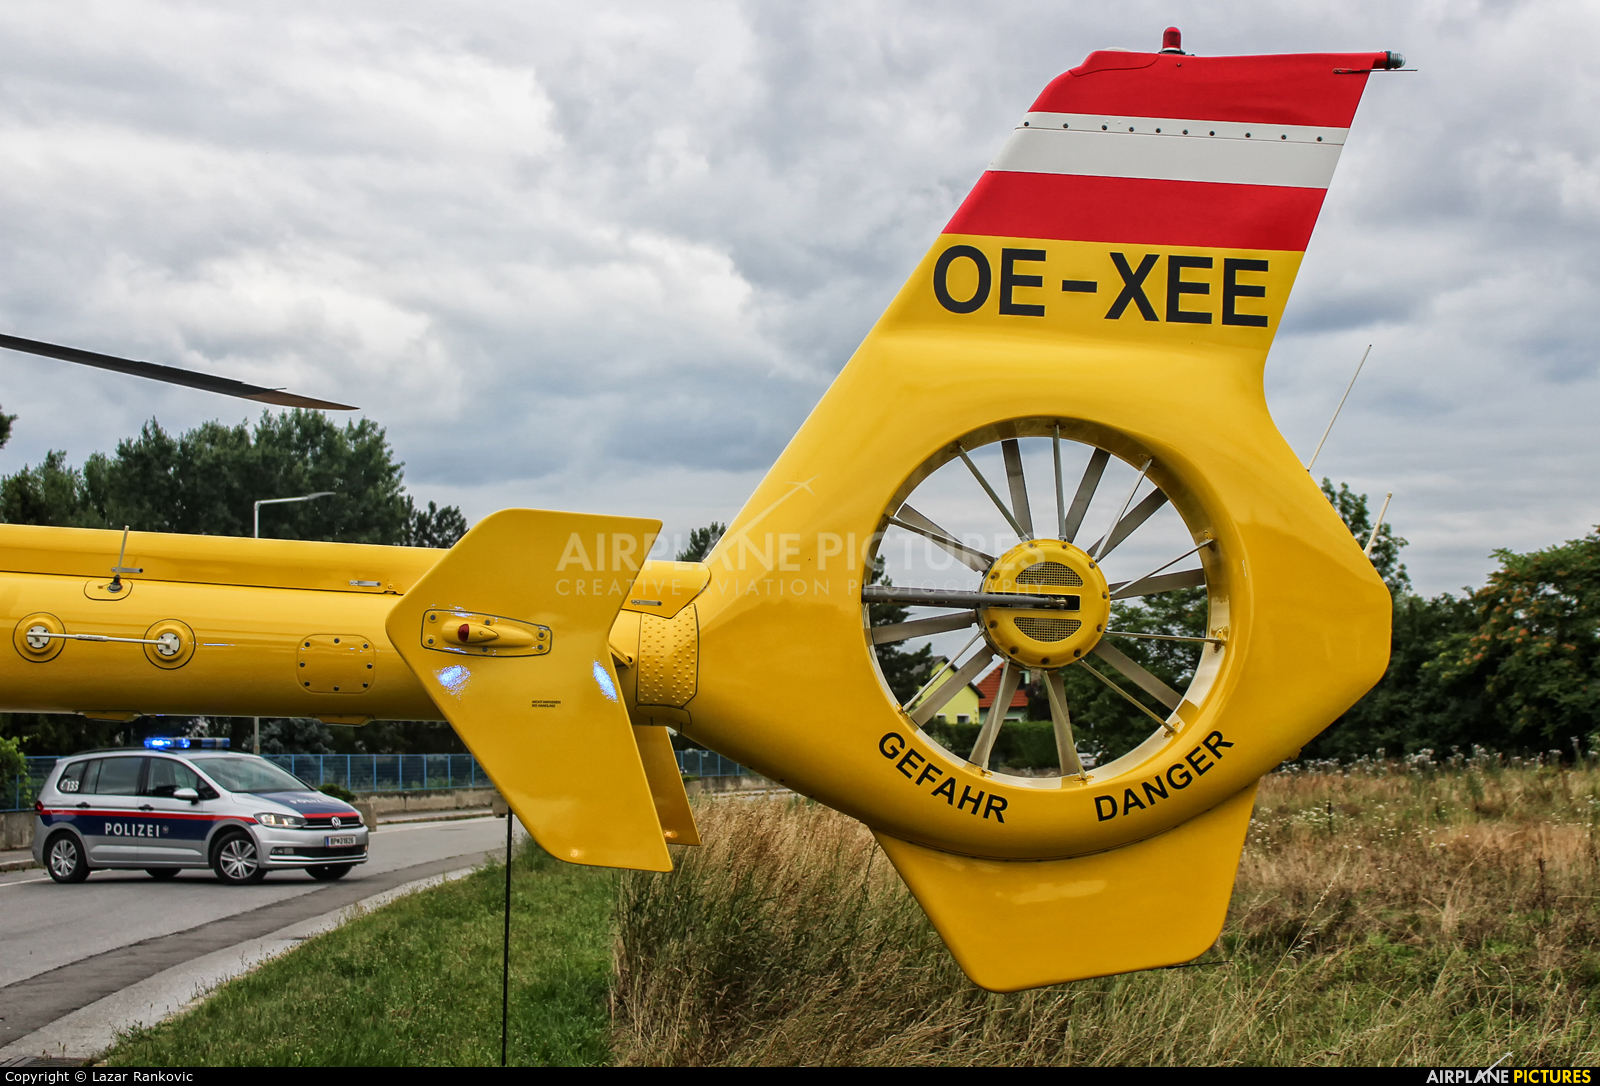 OAMTC OE-XEE aircraft at Off Airport - Austria